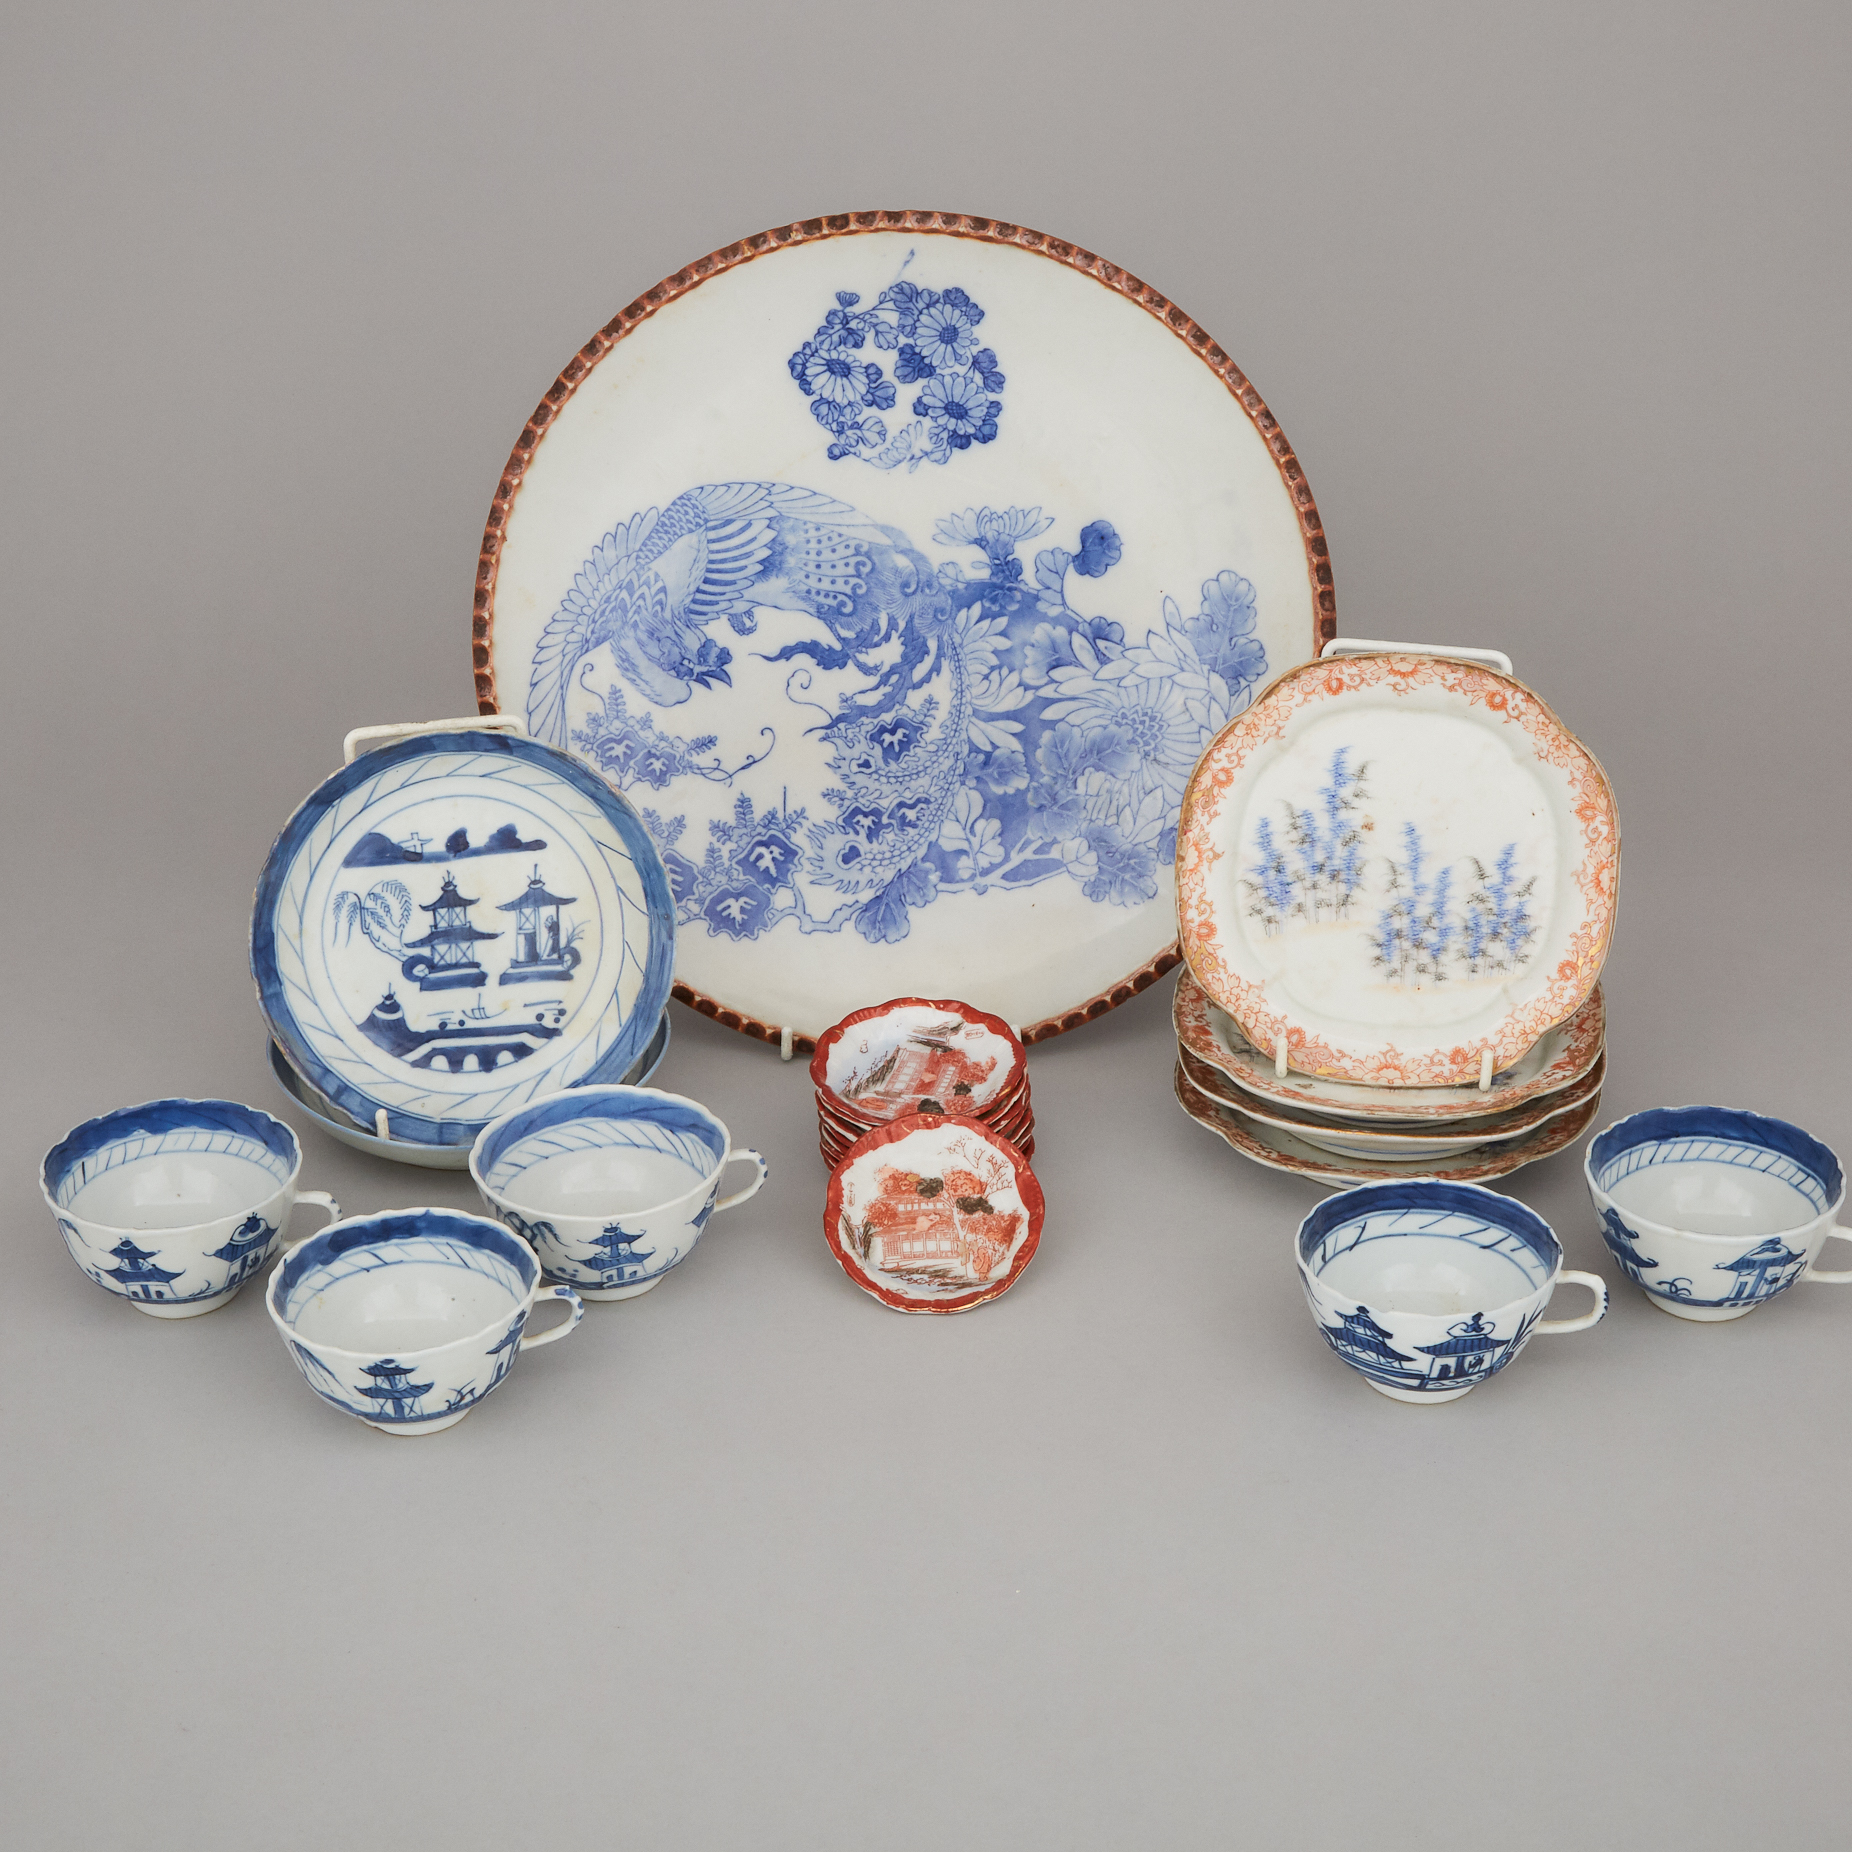 A Group of Twenty-One Japanese Kutani and Blue and White Porcelain Wares, 19th/Early 20th Century